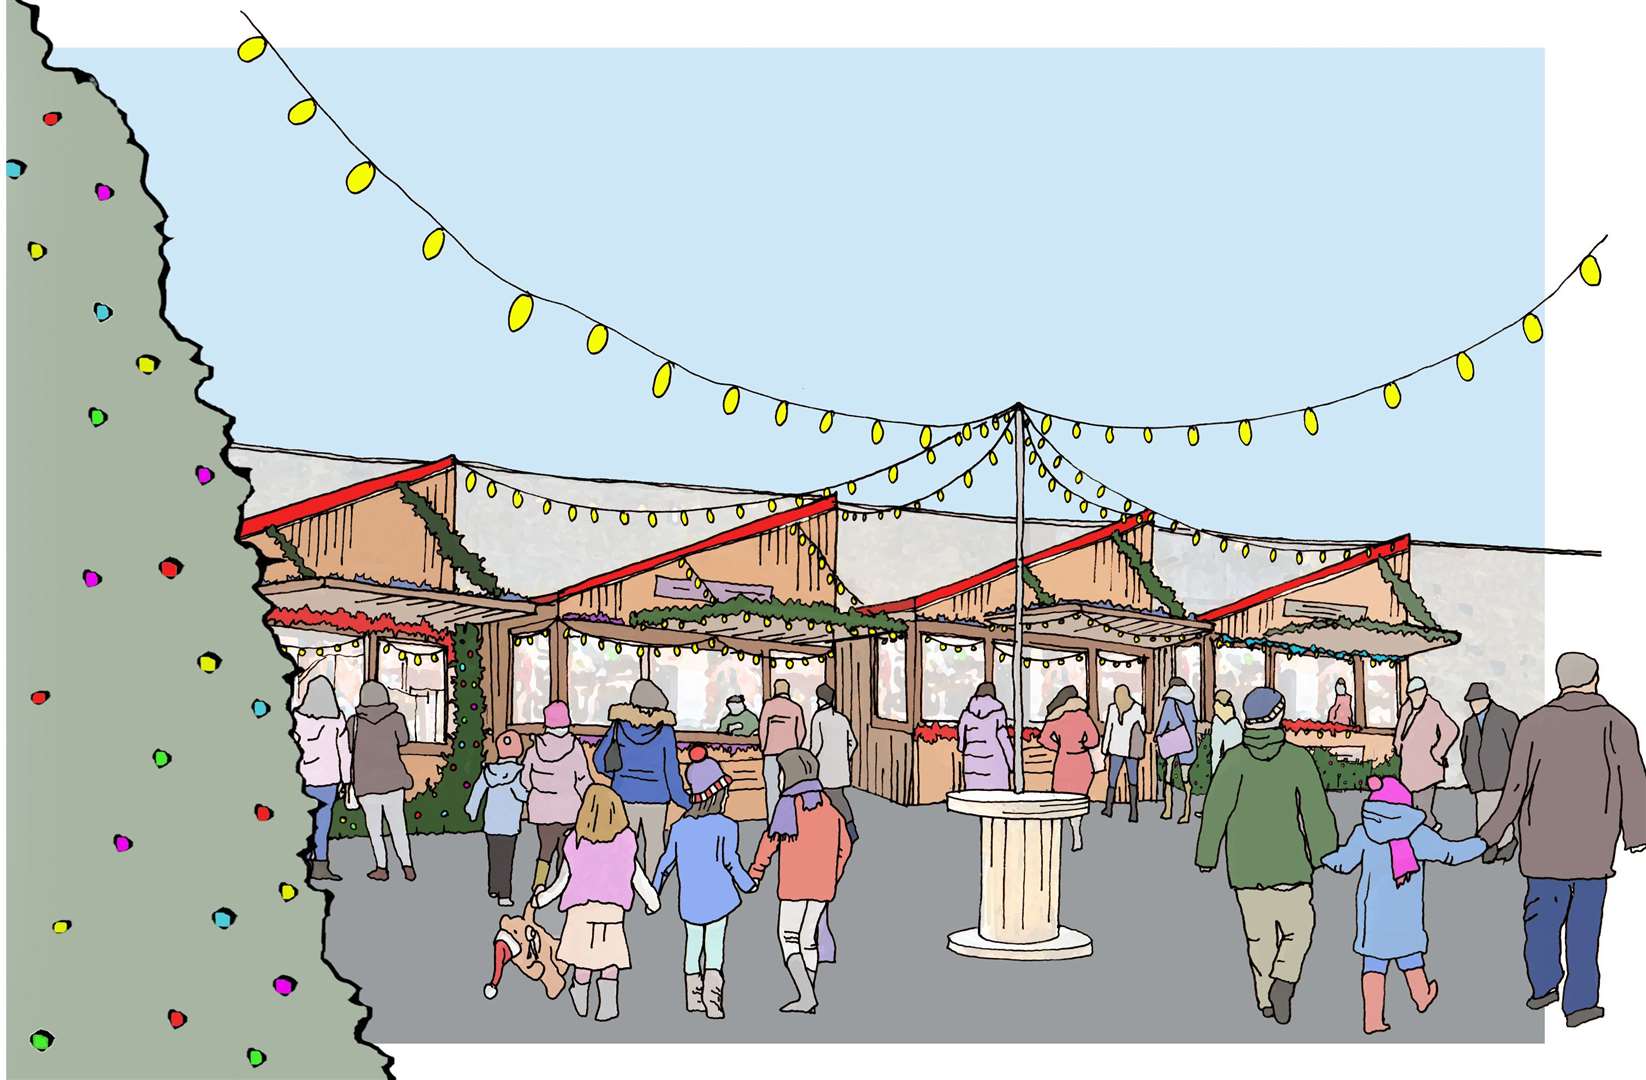 A Christmas market is coming to Folkestone Harbour Arm